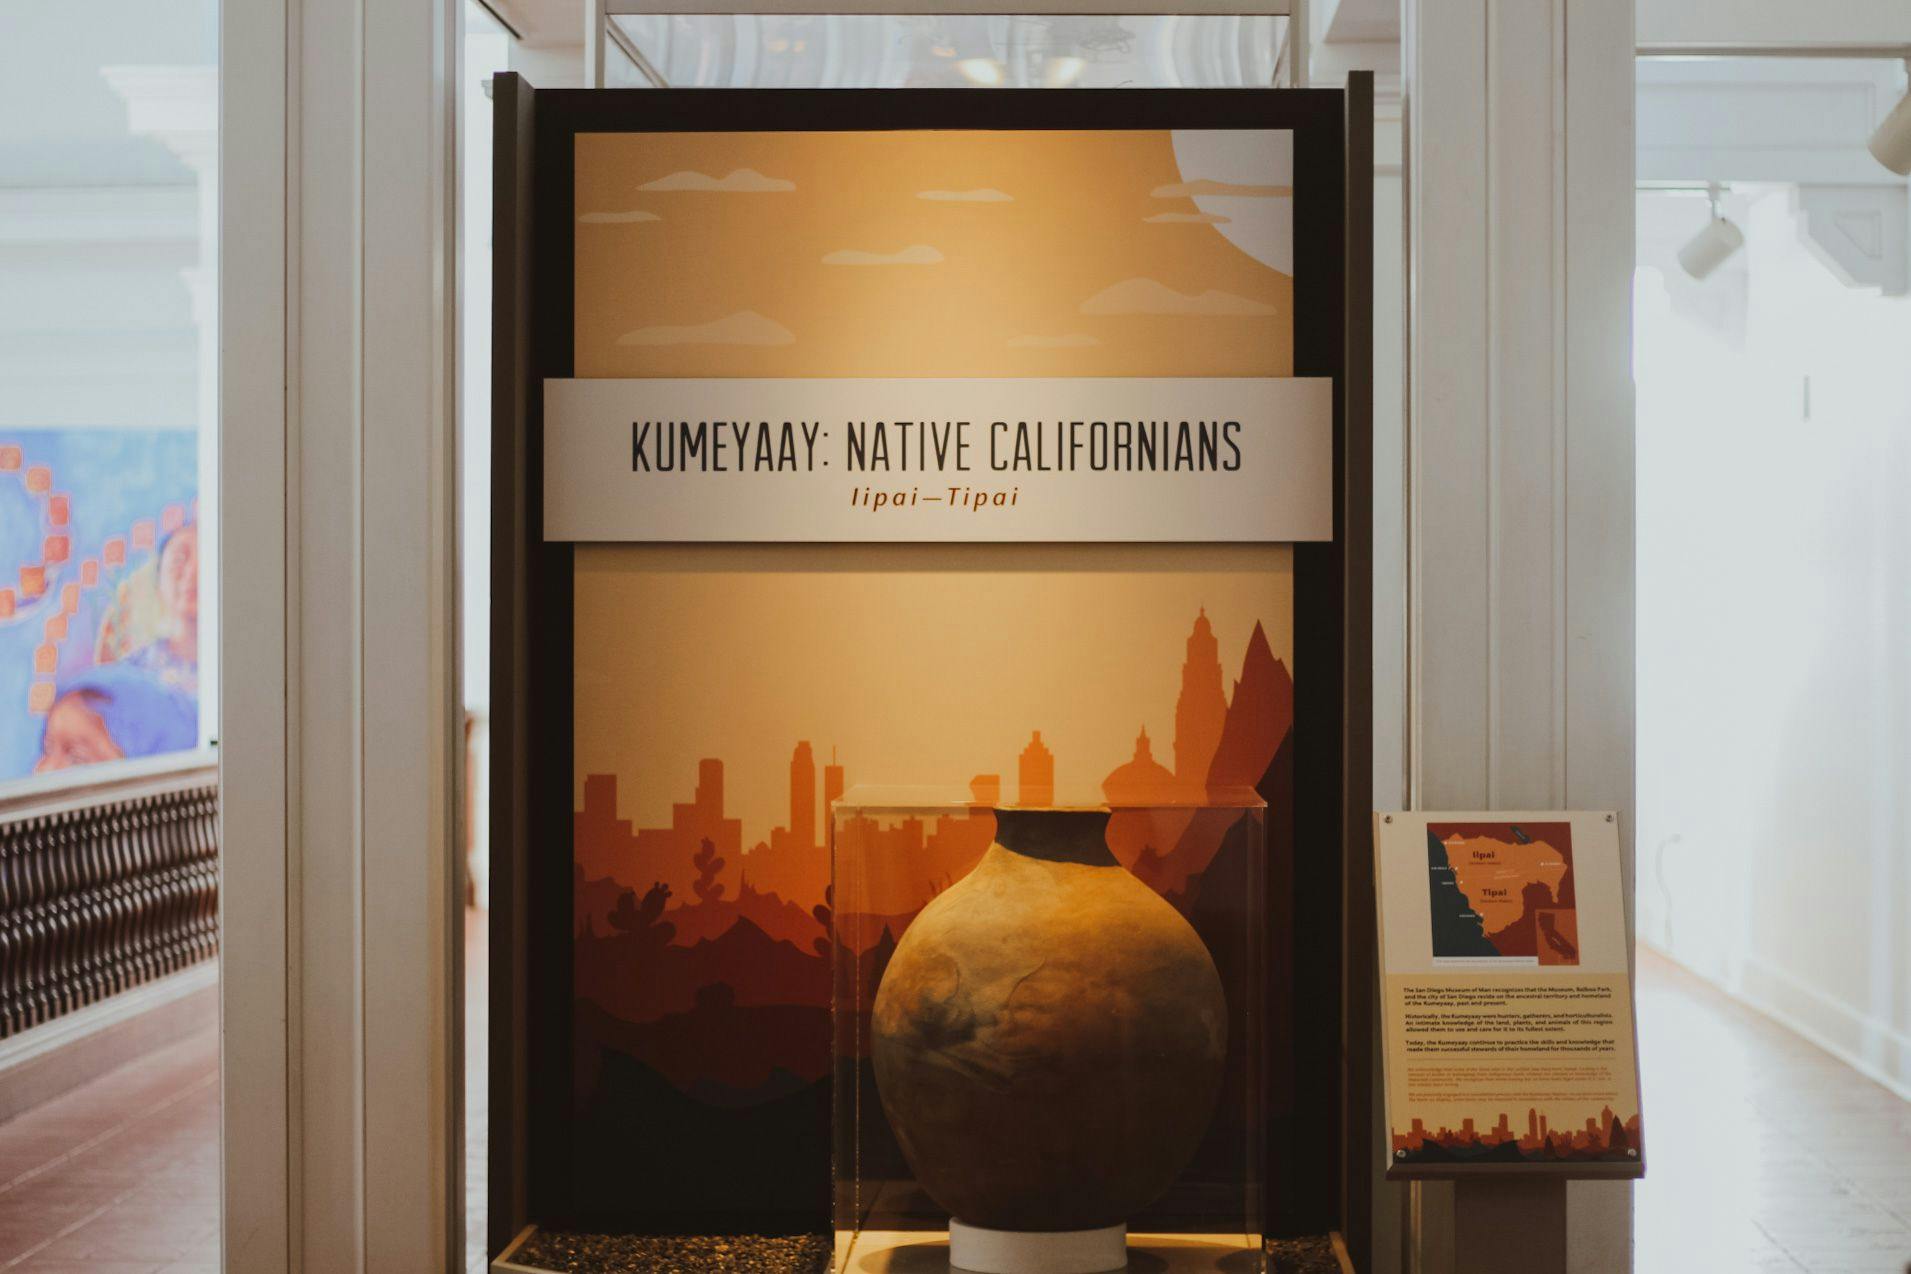 Title wall of the exhibit featuring a large pot before an animated natural landscape with text that reads, "Kumeyaay: Native Californians - Iipai-Tipai"